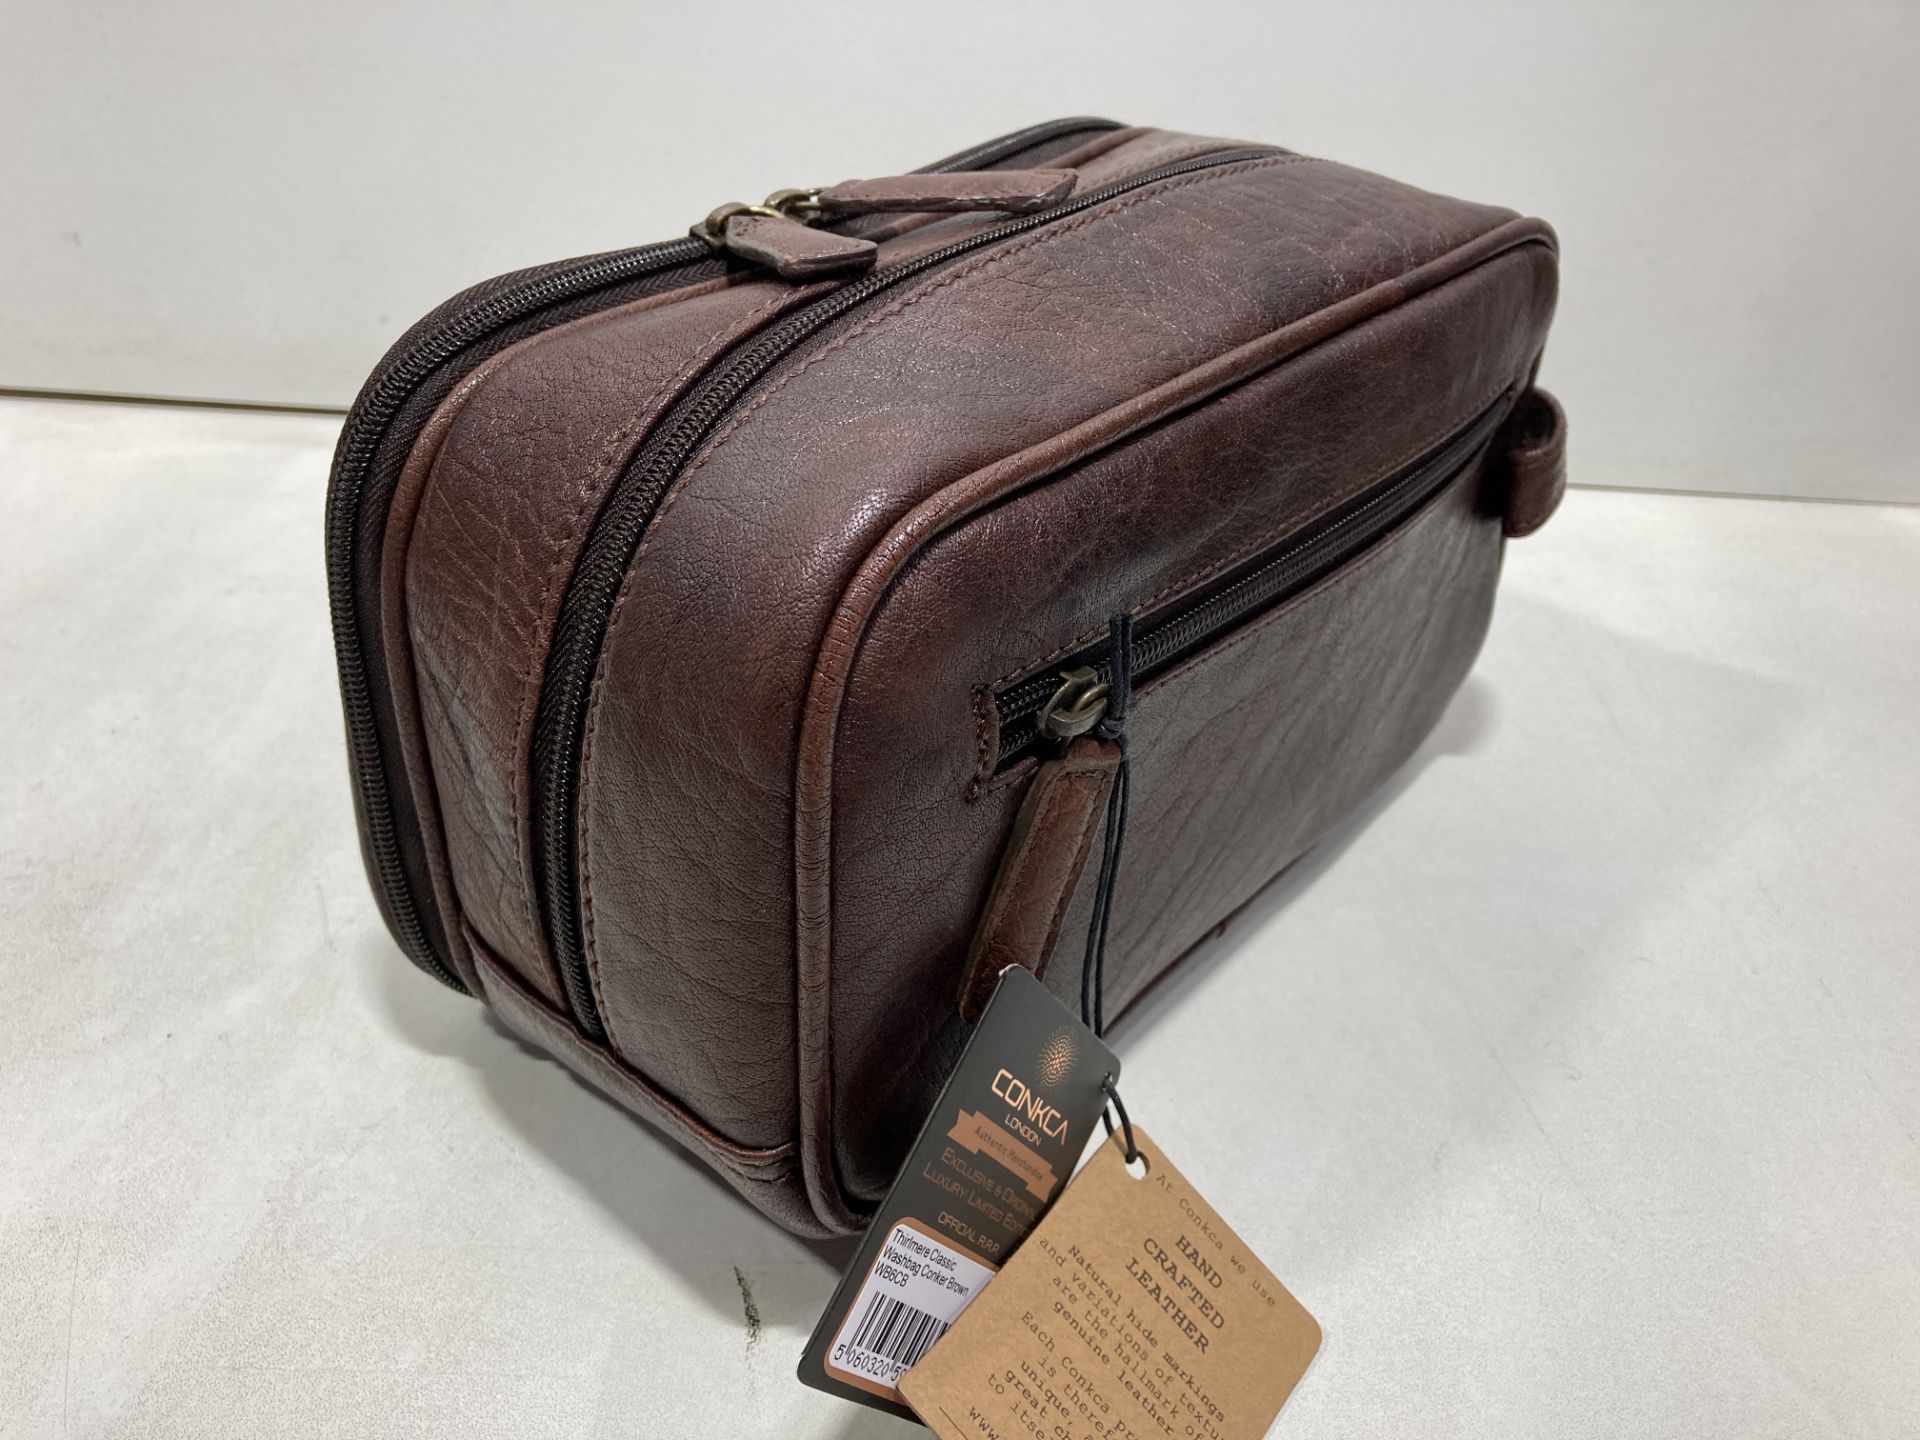 Conka London Thirlmere Classic Washbag | Conker Brown | RRP £48.00 - Image 3 of 5